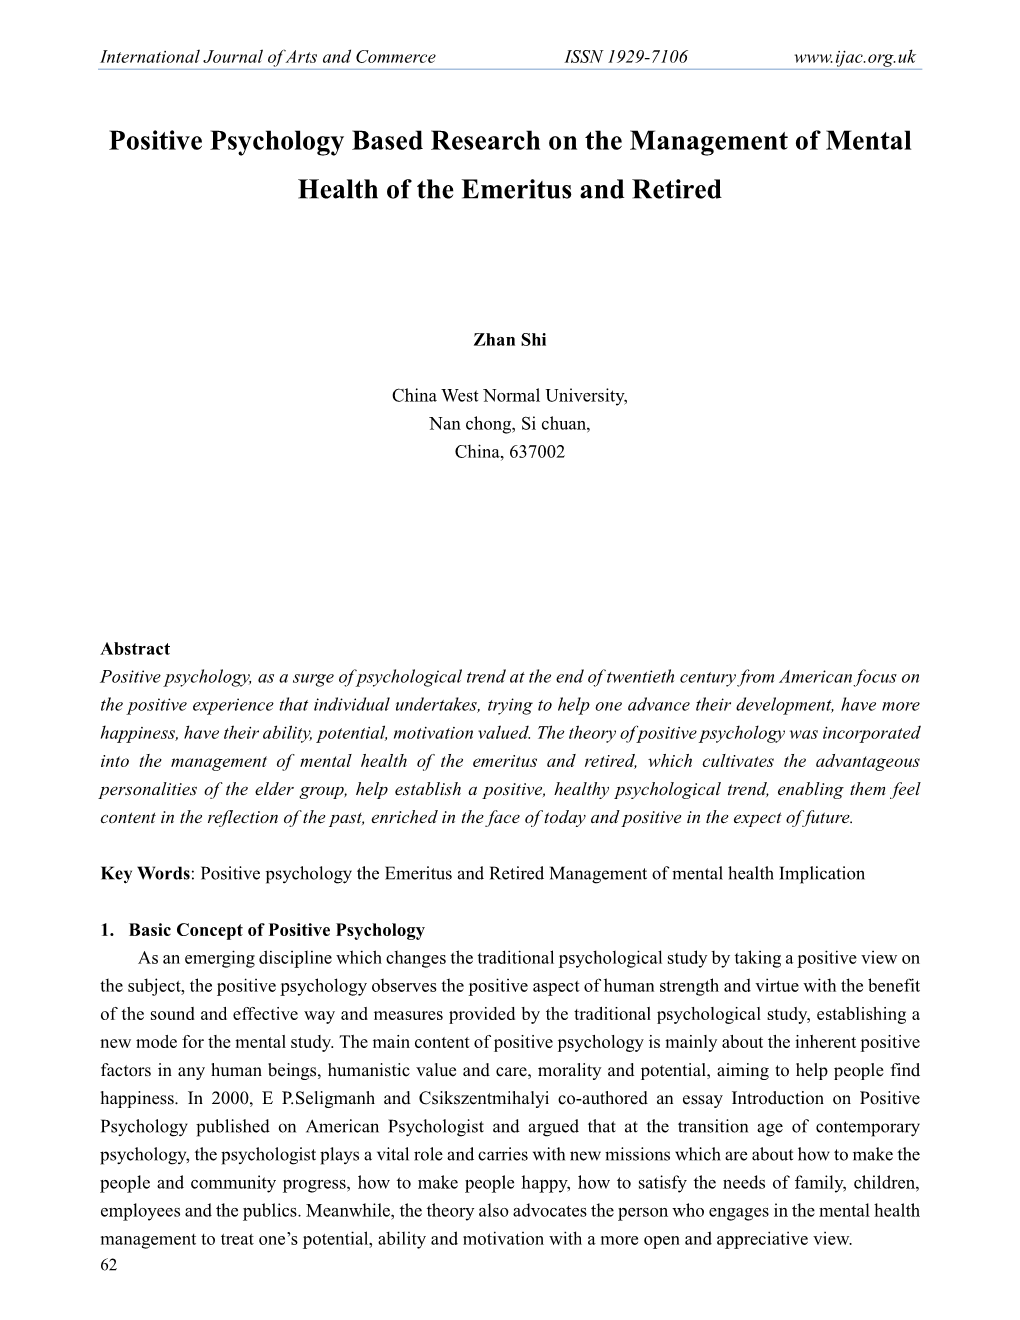 Positive Psychology Based Research on the Management of Mental Health of the Emeritus and Retired